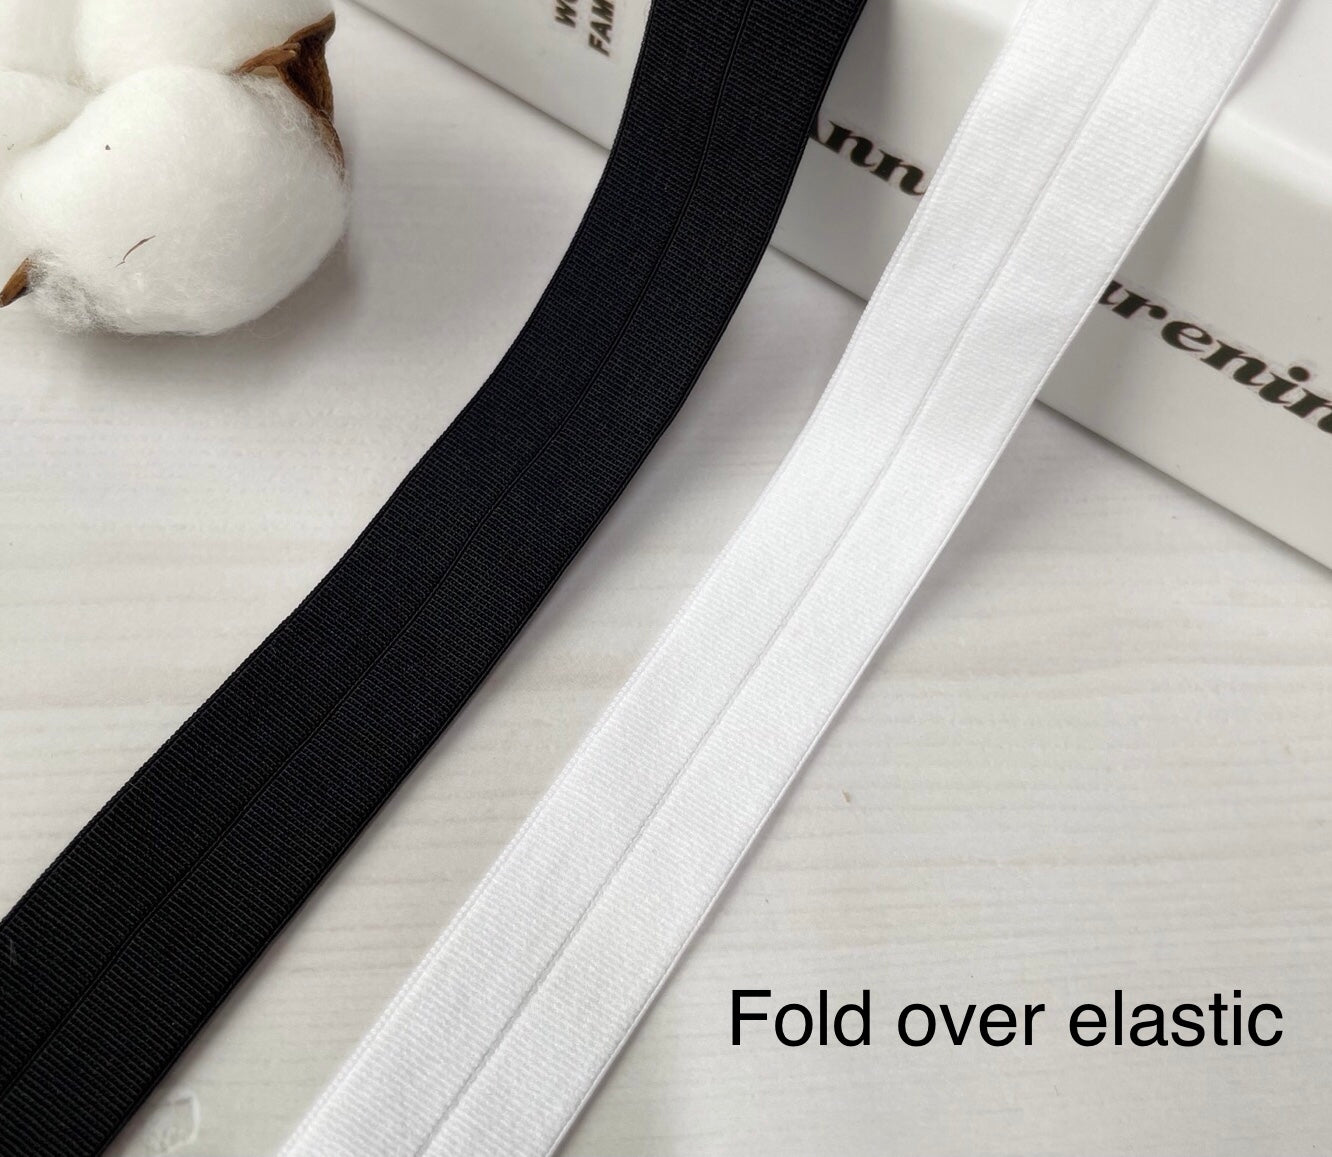 Fold over elastic binding tapes for bags, pockets, clothes, home decor ...